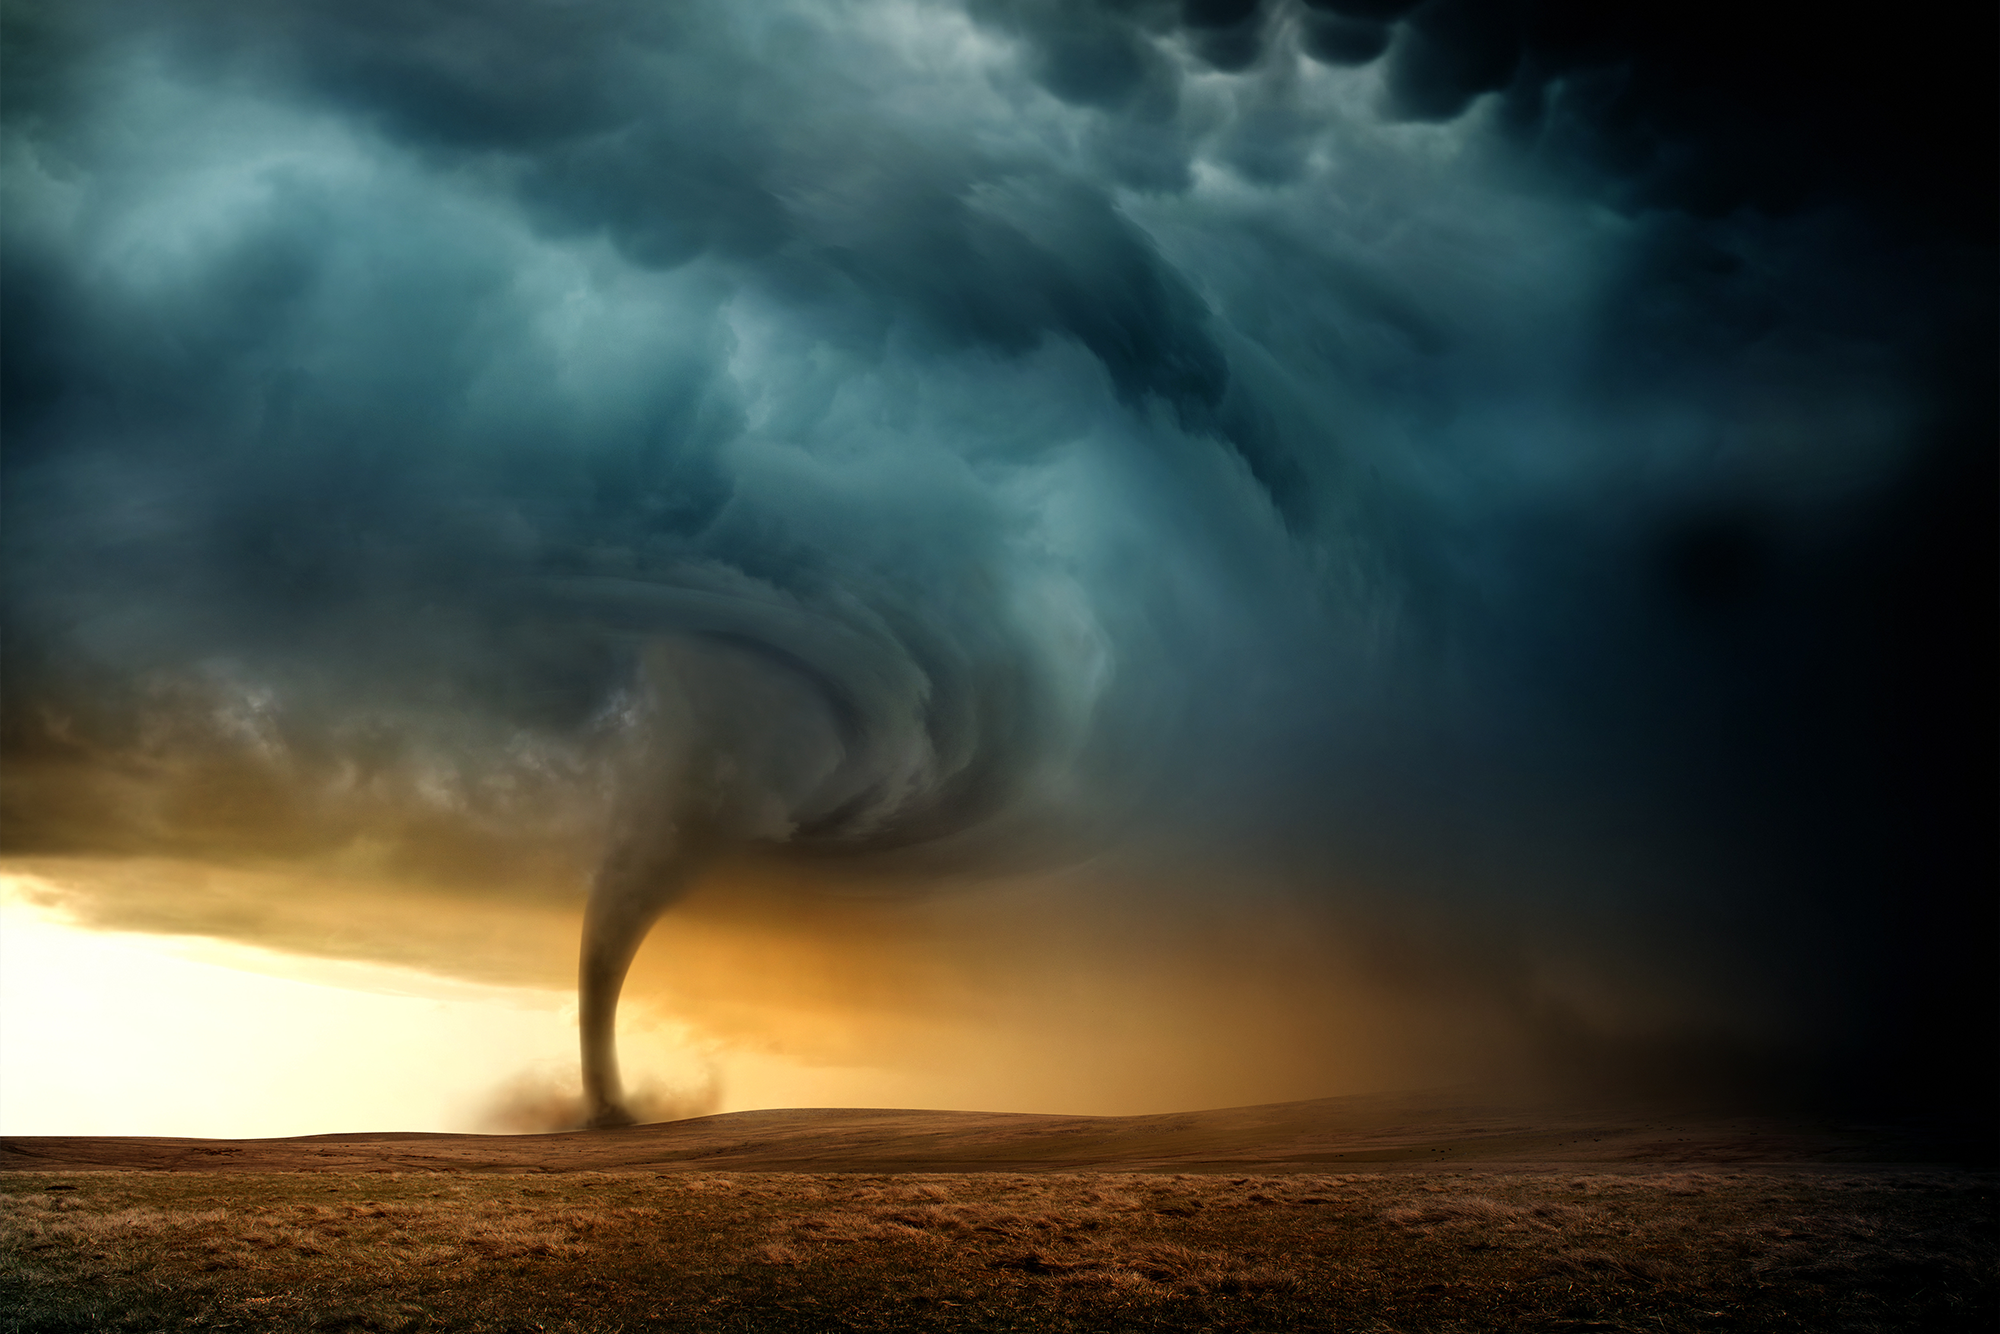 Tornado Safety Precautions: A tornado touching down in the distance,